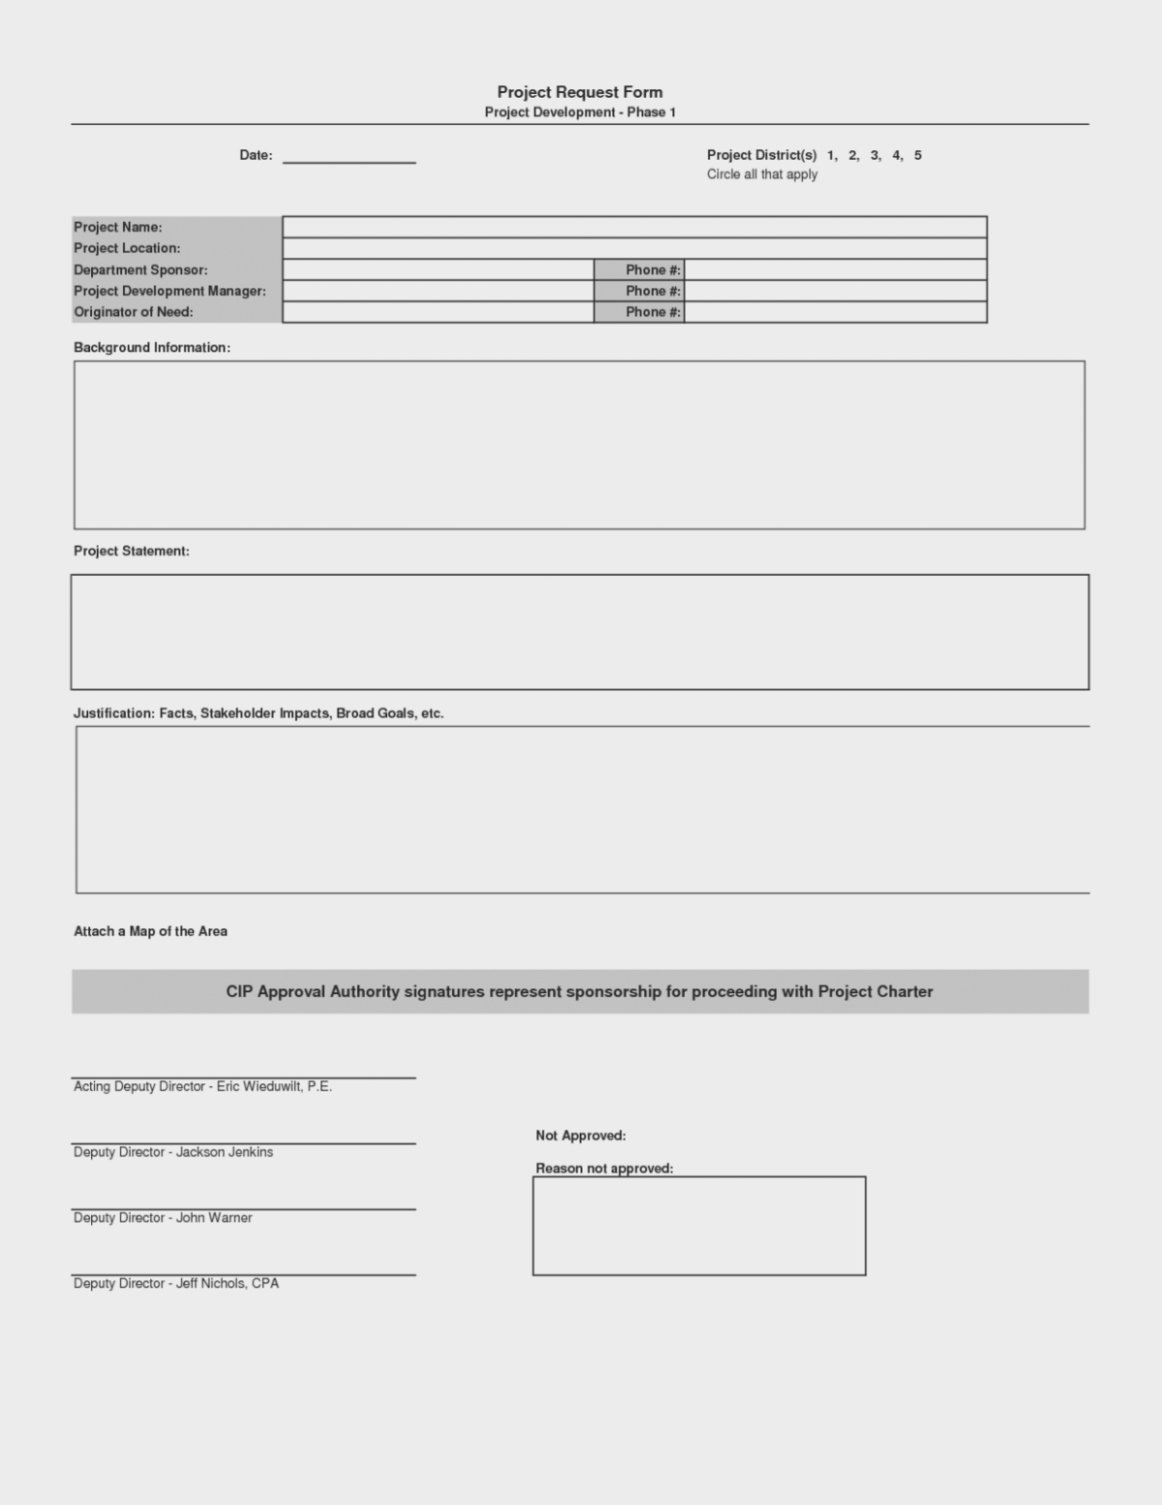 Project Request form Template Fresh How Project Request form